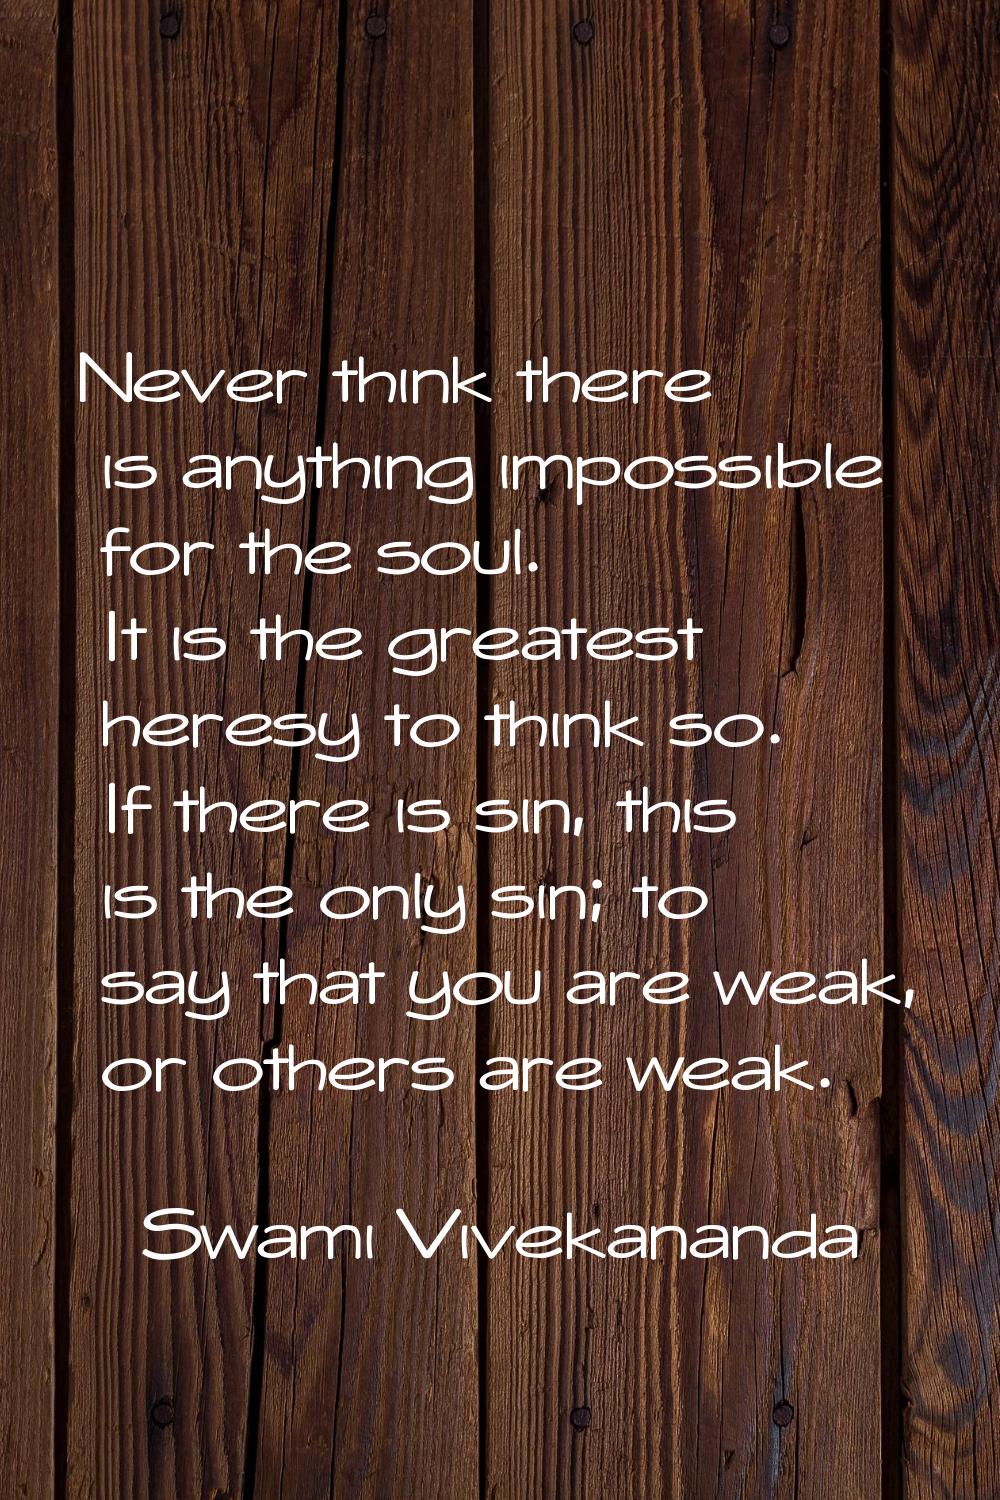 Never think there is anything impossible for the soul. It is the greatest heresy to think so. If th